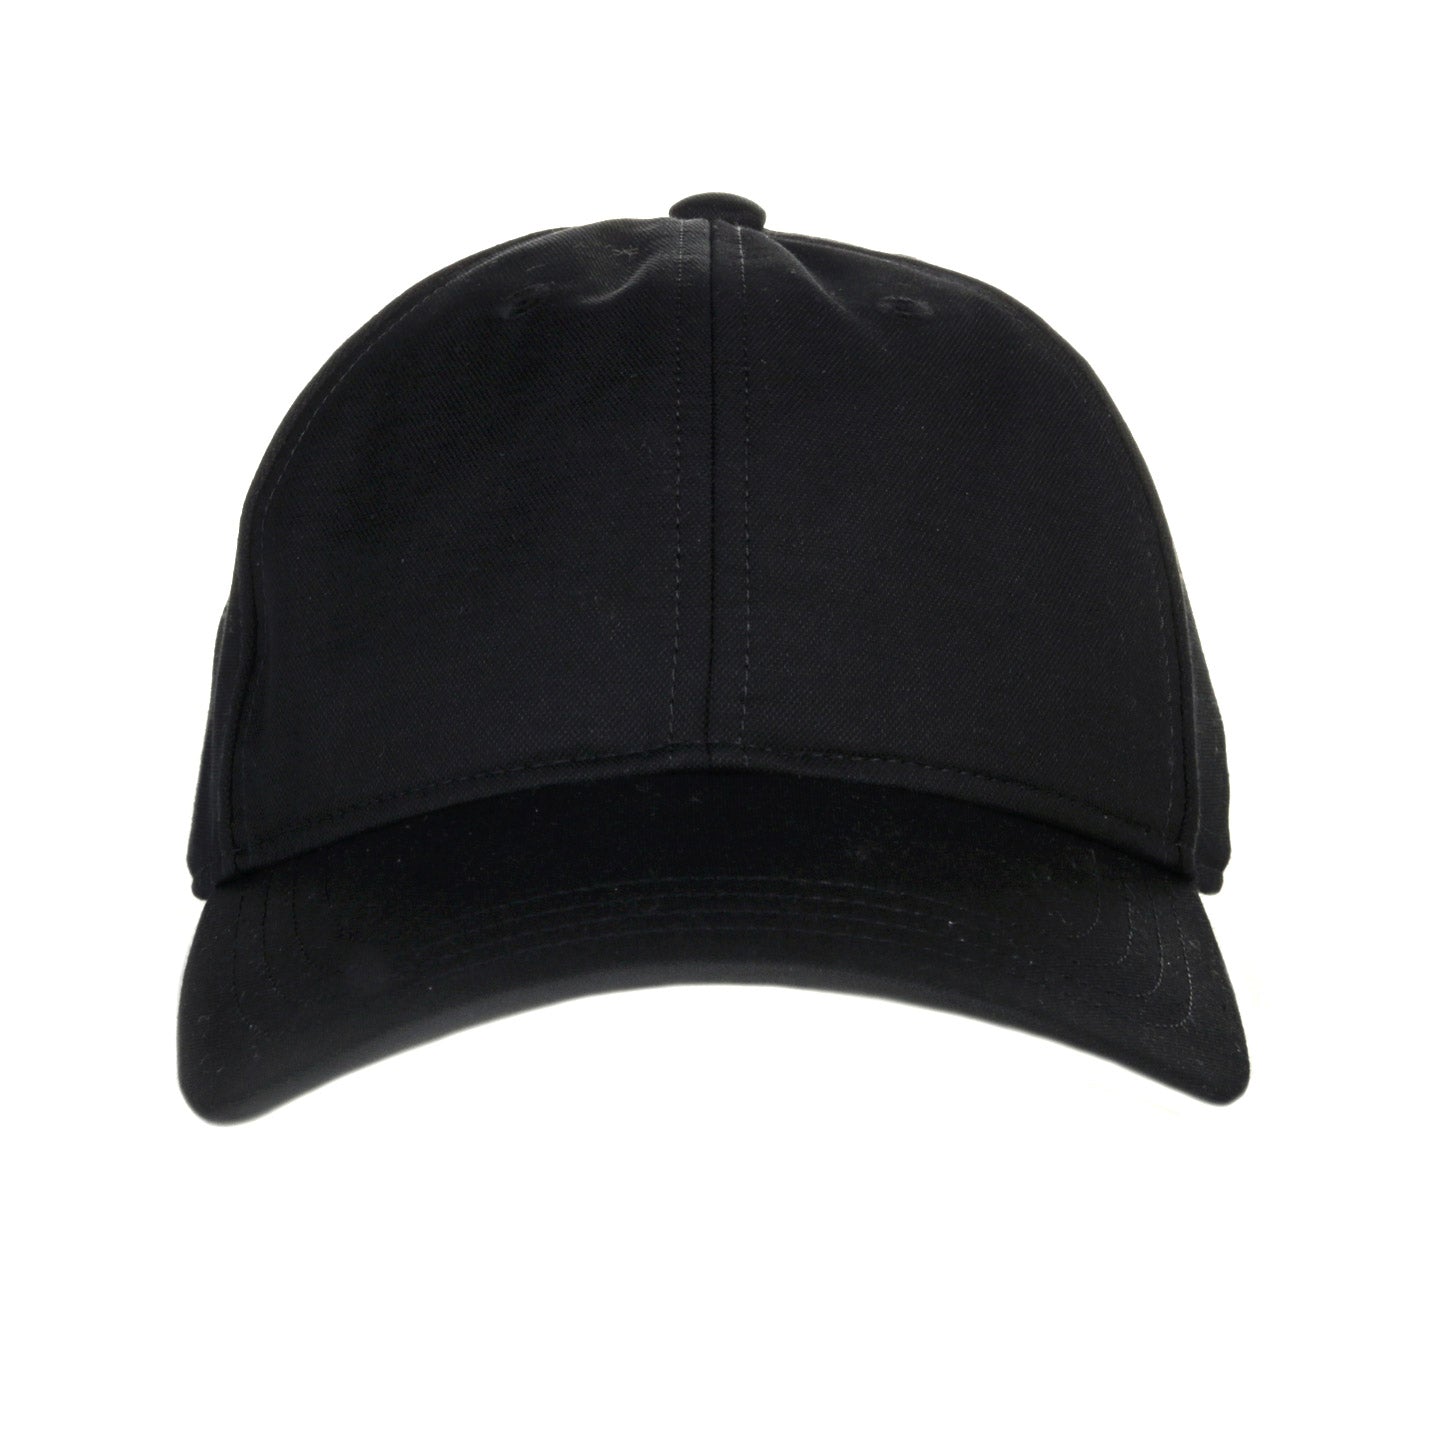 OUR LEGACY BALLCAP DELUXE BLACK EXQUISITE WEAVE